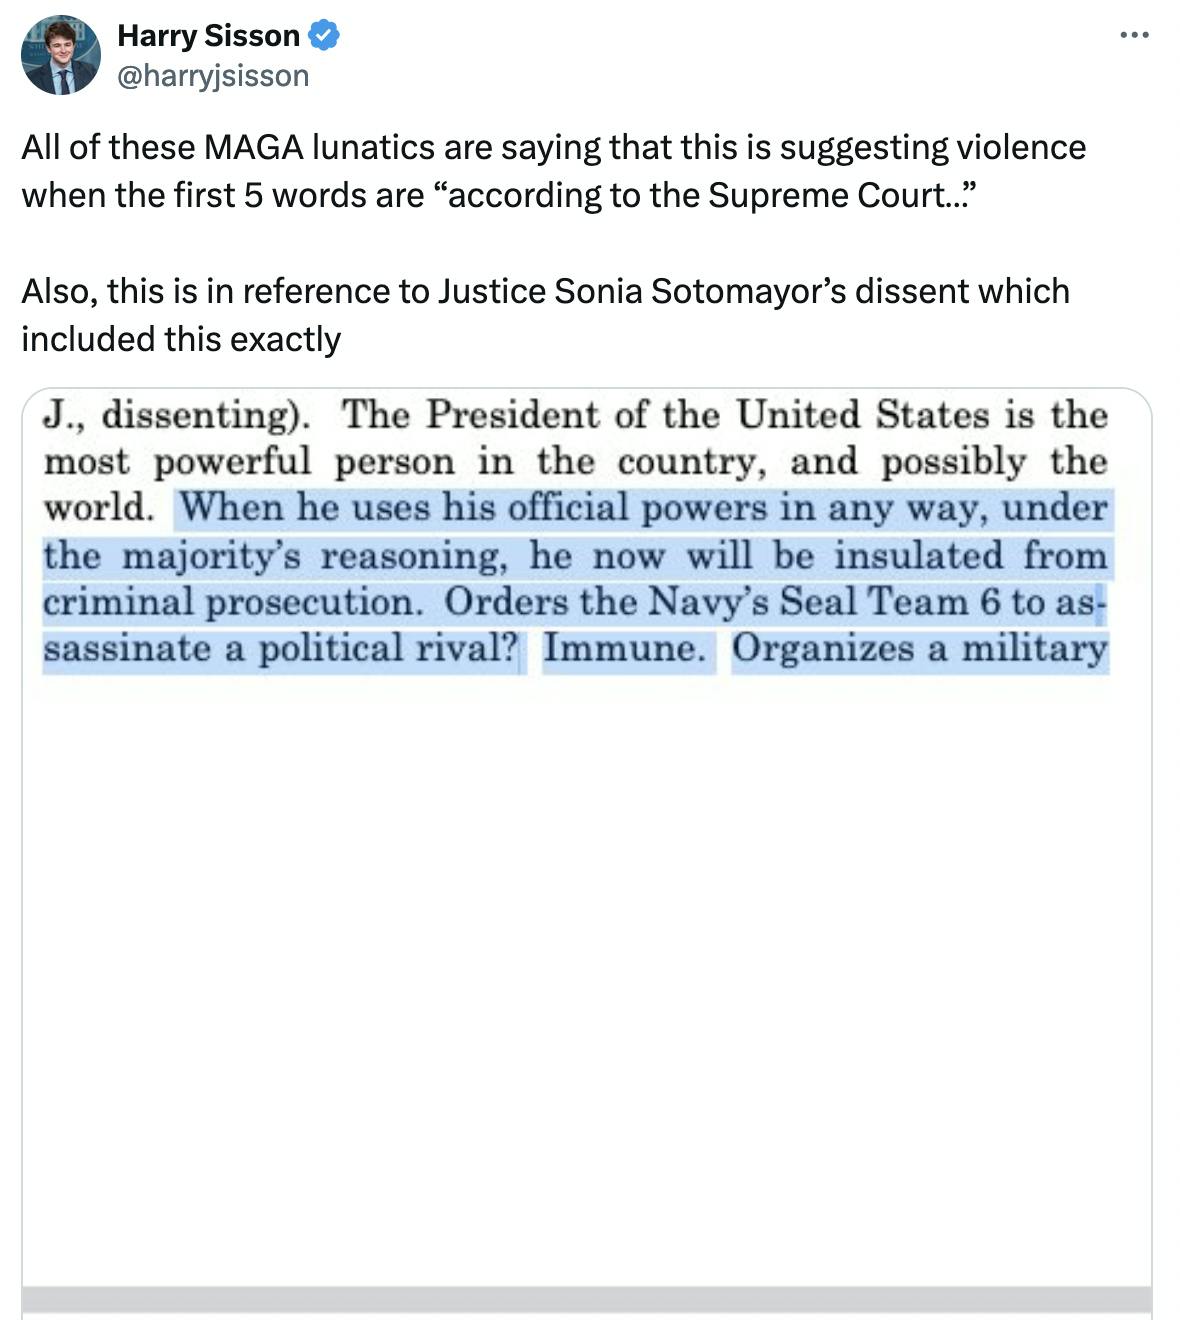 Twitter Screenshot Harry Sisson @harryjsisson: All of these MAGA lunatics are saying that this is suggesting violence when the first 5 words are “according to the Supreme Court…” Also, this is in reference to Justice Sonia Sotomayor’s dissent which included this exactly (included screenshot with part of Sonia Sotomayor's dissent)